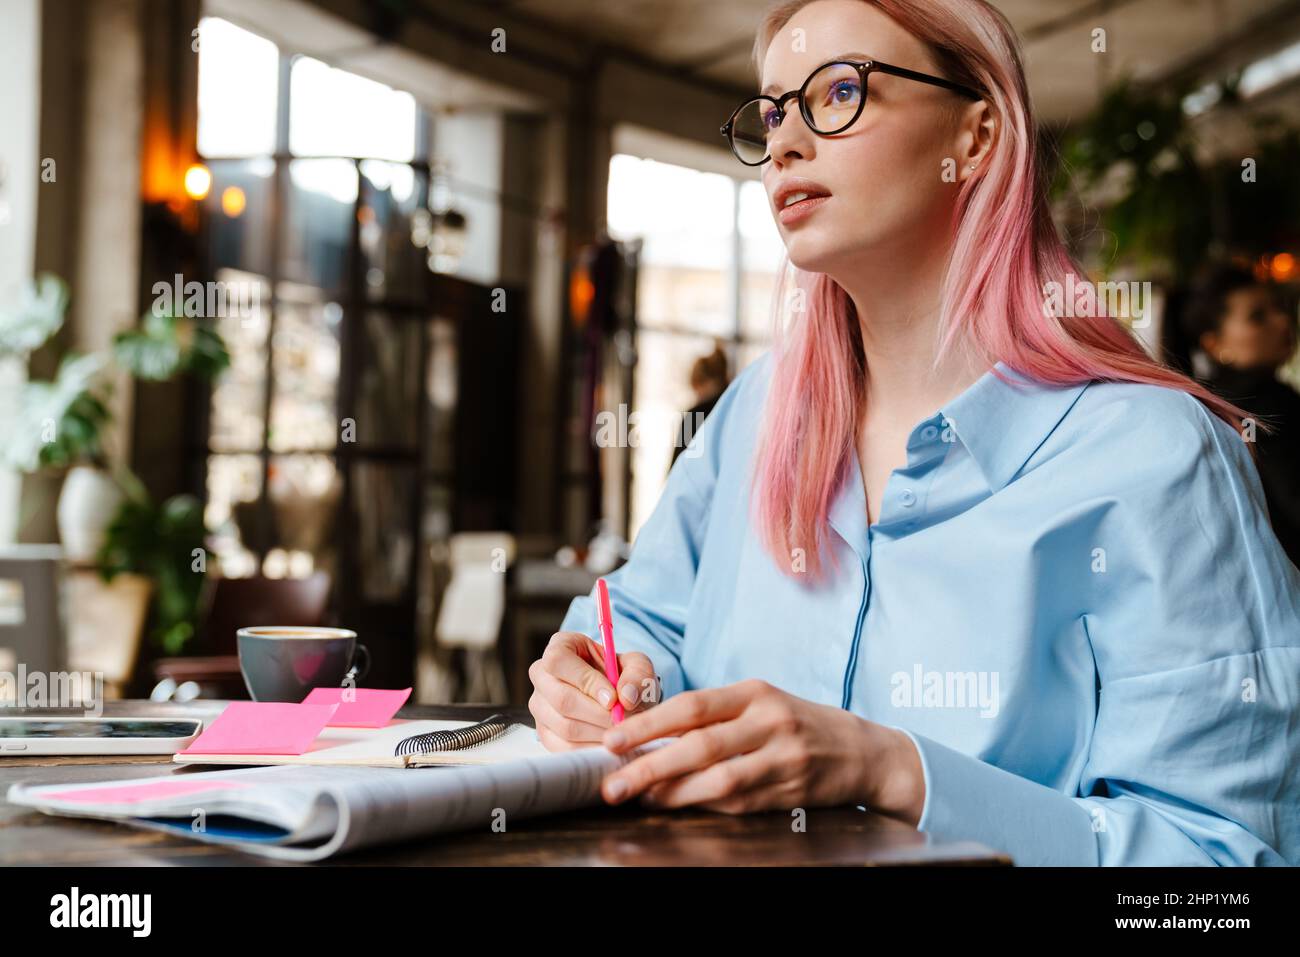 Young beautiful woman with pink hair studying and making notes while sitting in cafe Stock Photo